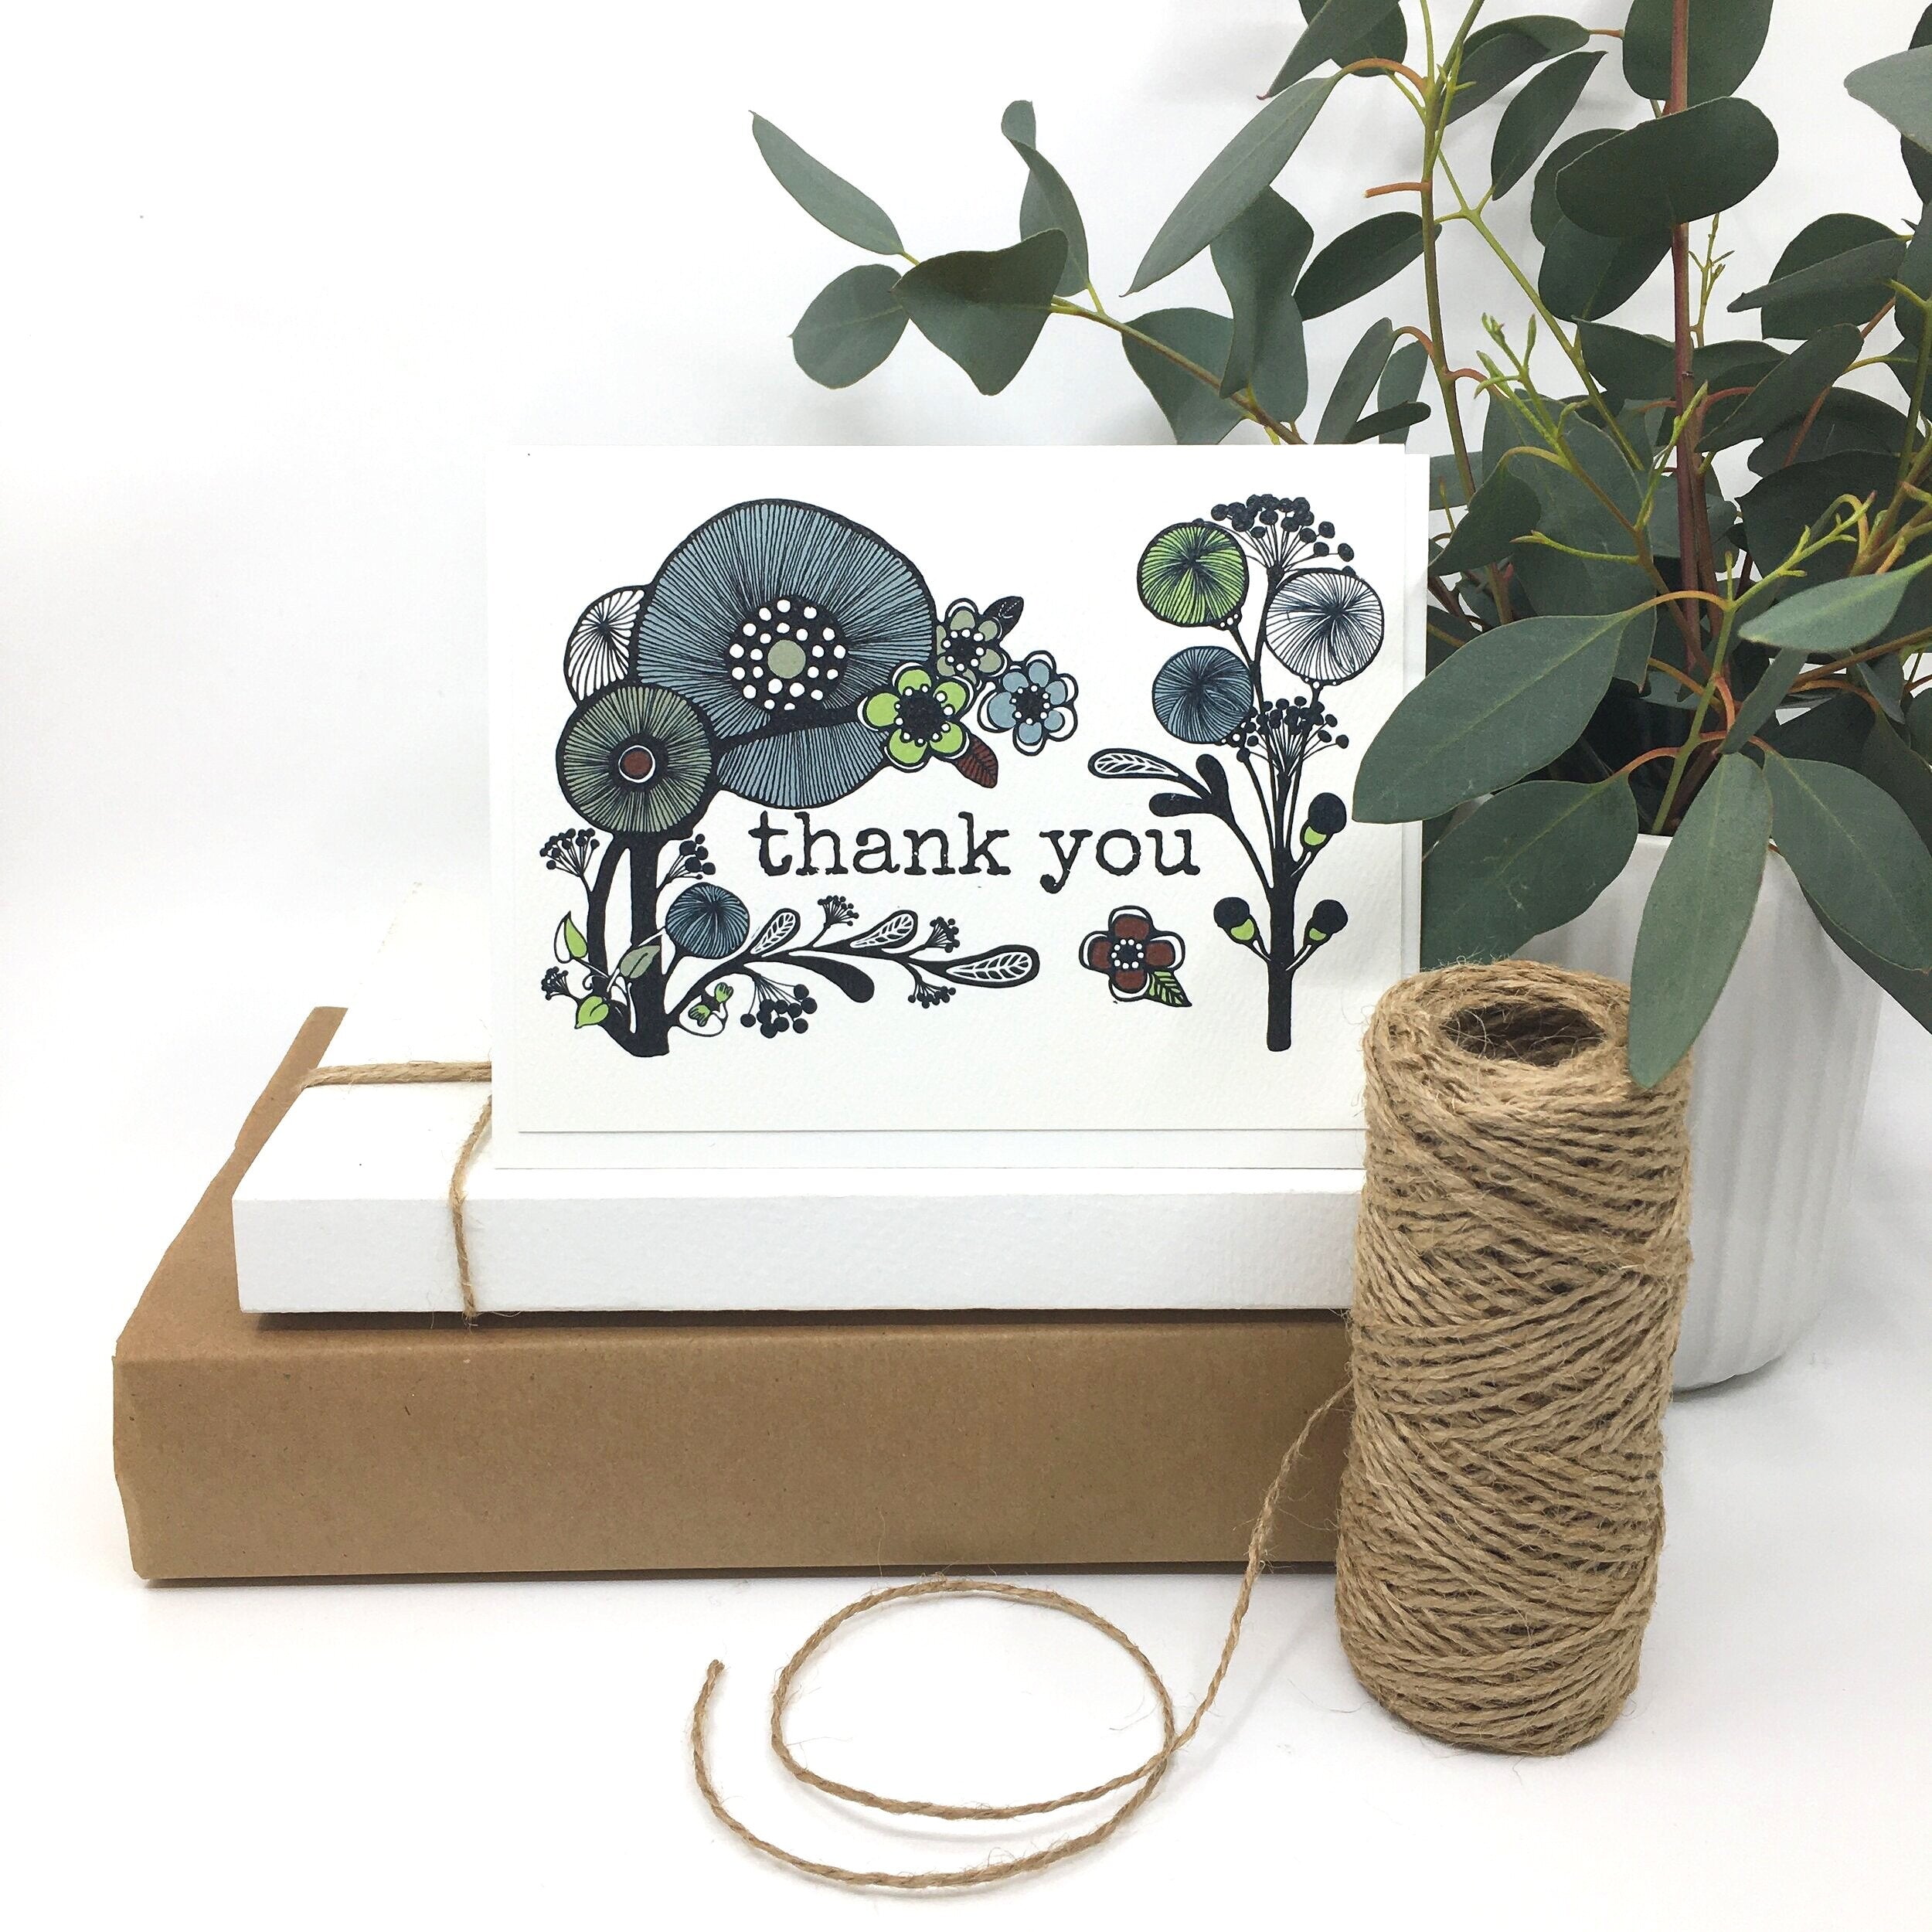 Scandinavian folk style thank you card sits on two paper boxes besides a roll of twine and a potted plant